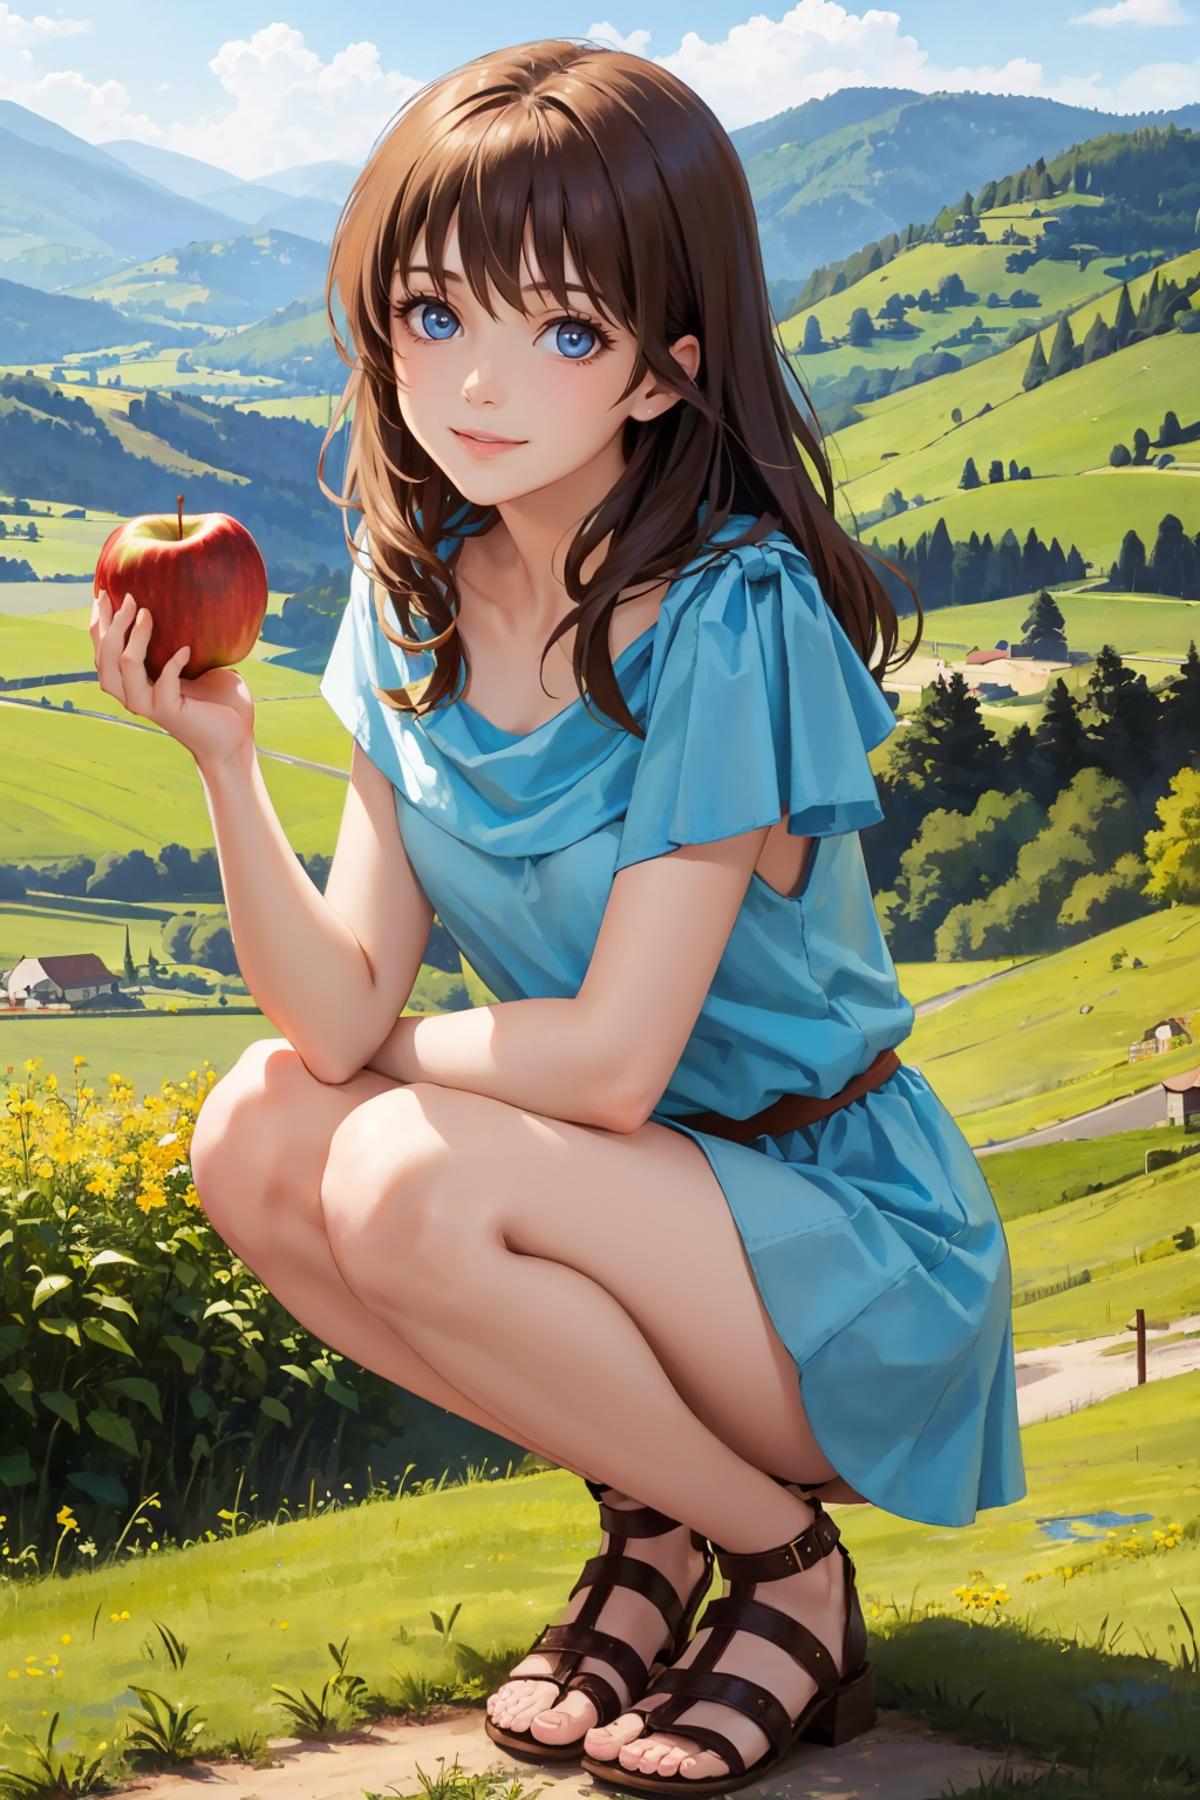 A girl sitting in a field holding an apple.